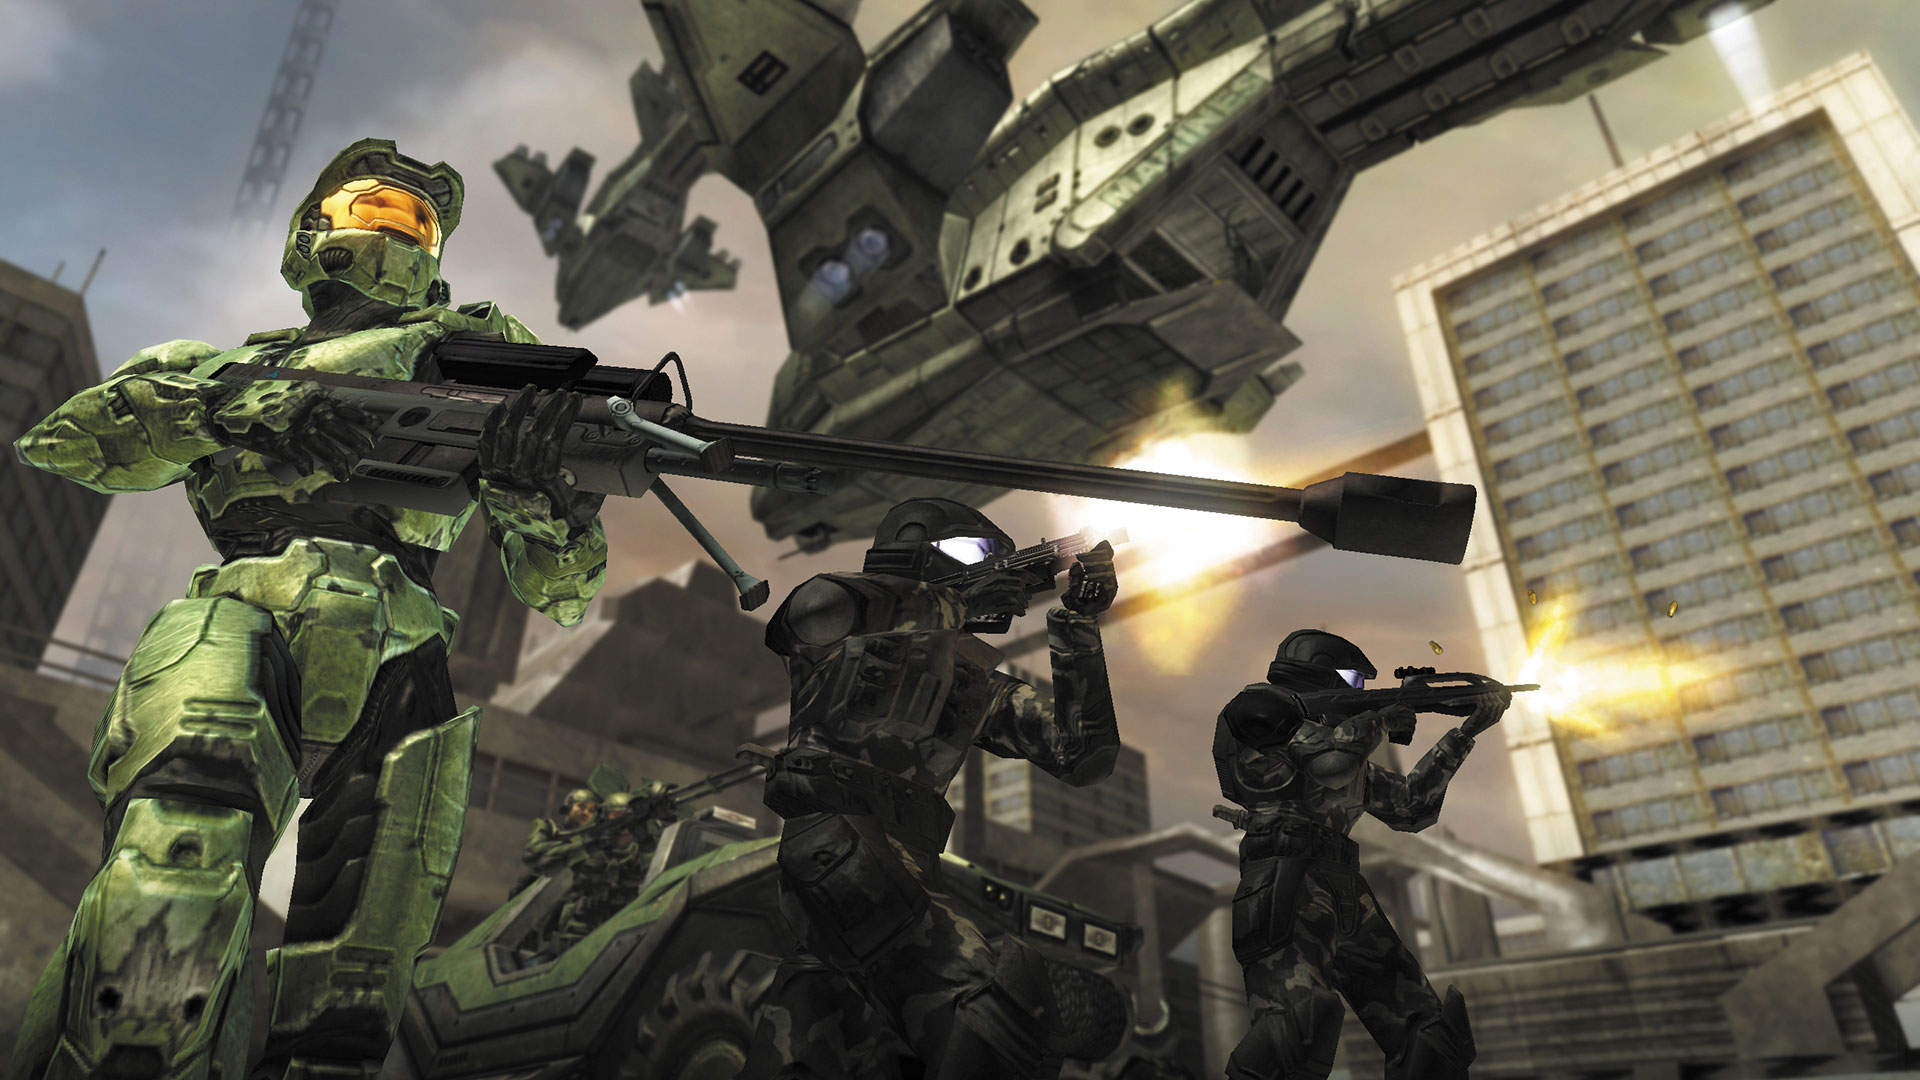 Halo: Combat Evolved' remaster for PC enters public testing in January